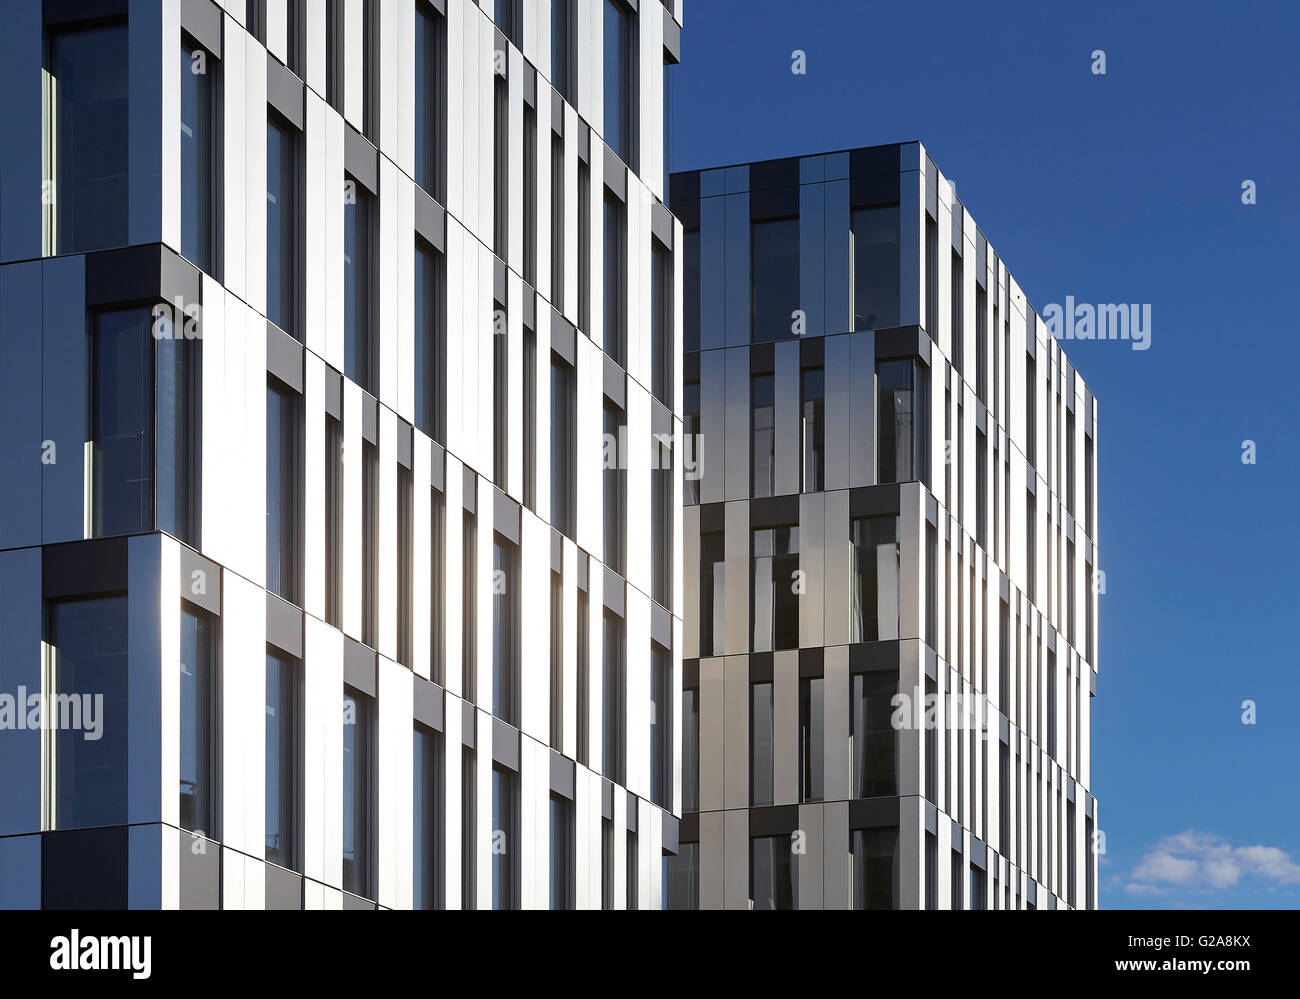 Facade panelling in perspective. Fornebuporten, Oslo, Norway. Architect: DARK, 2015. Stock Photo